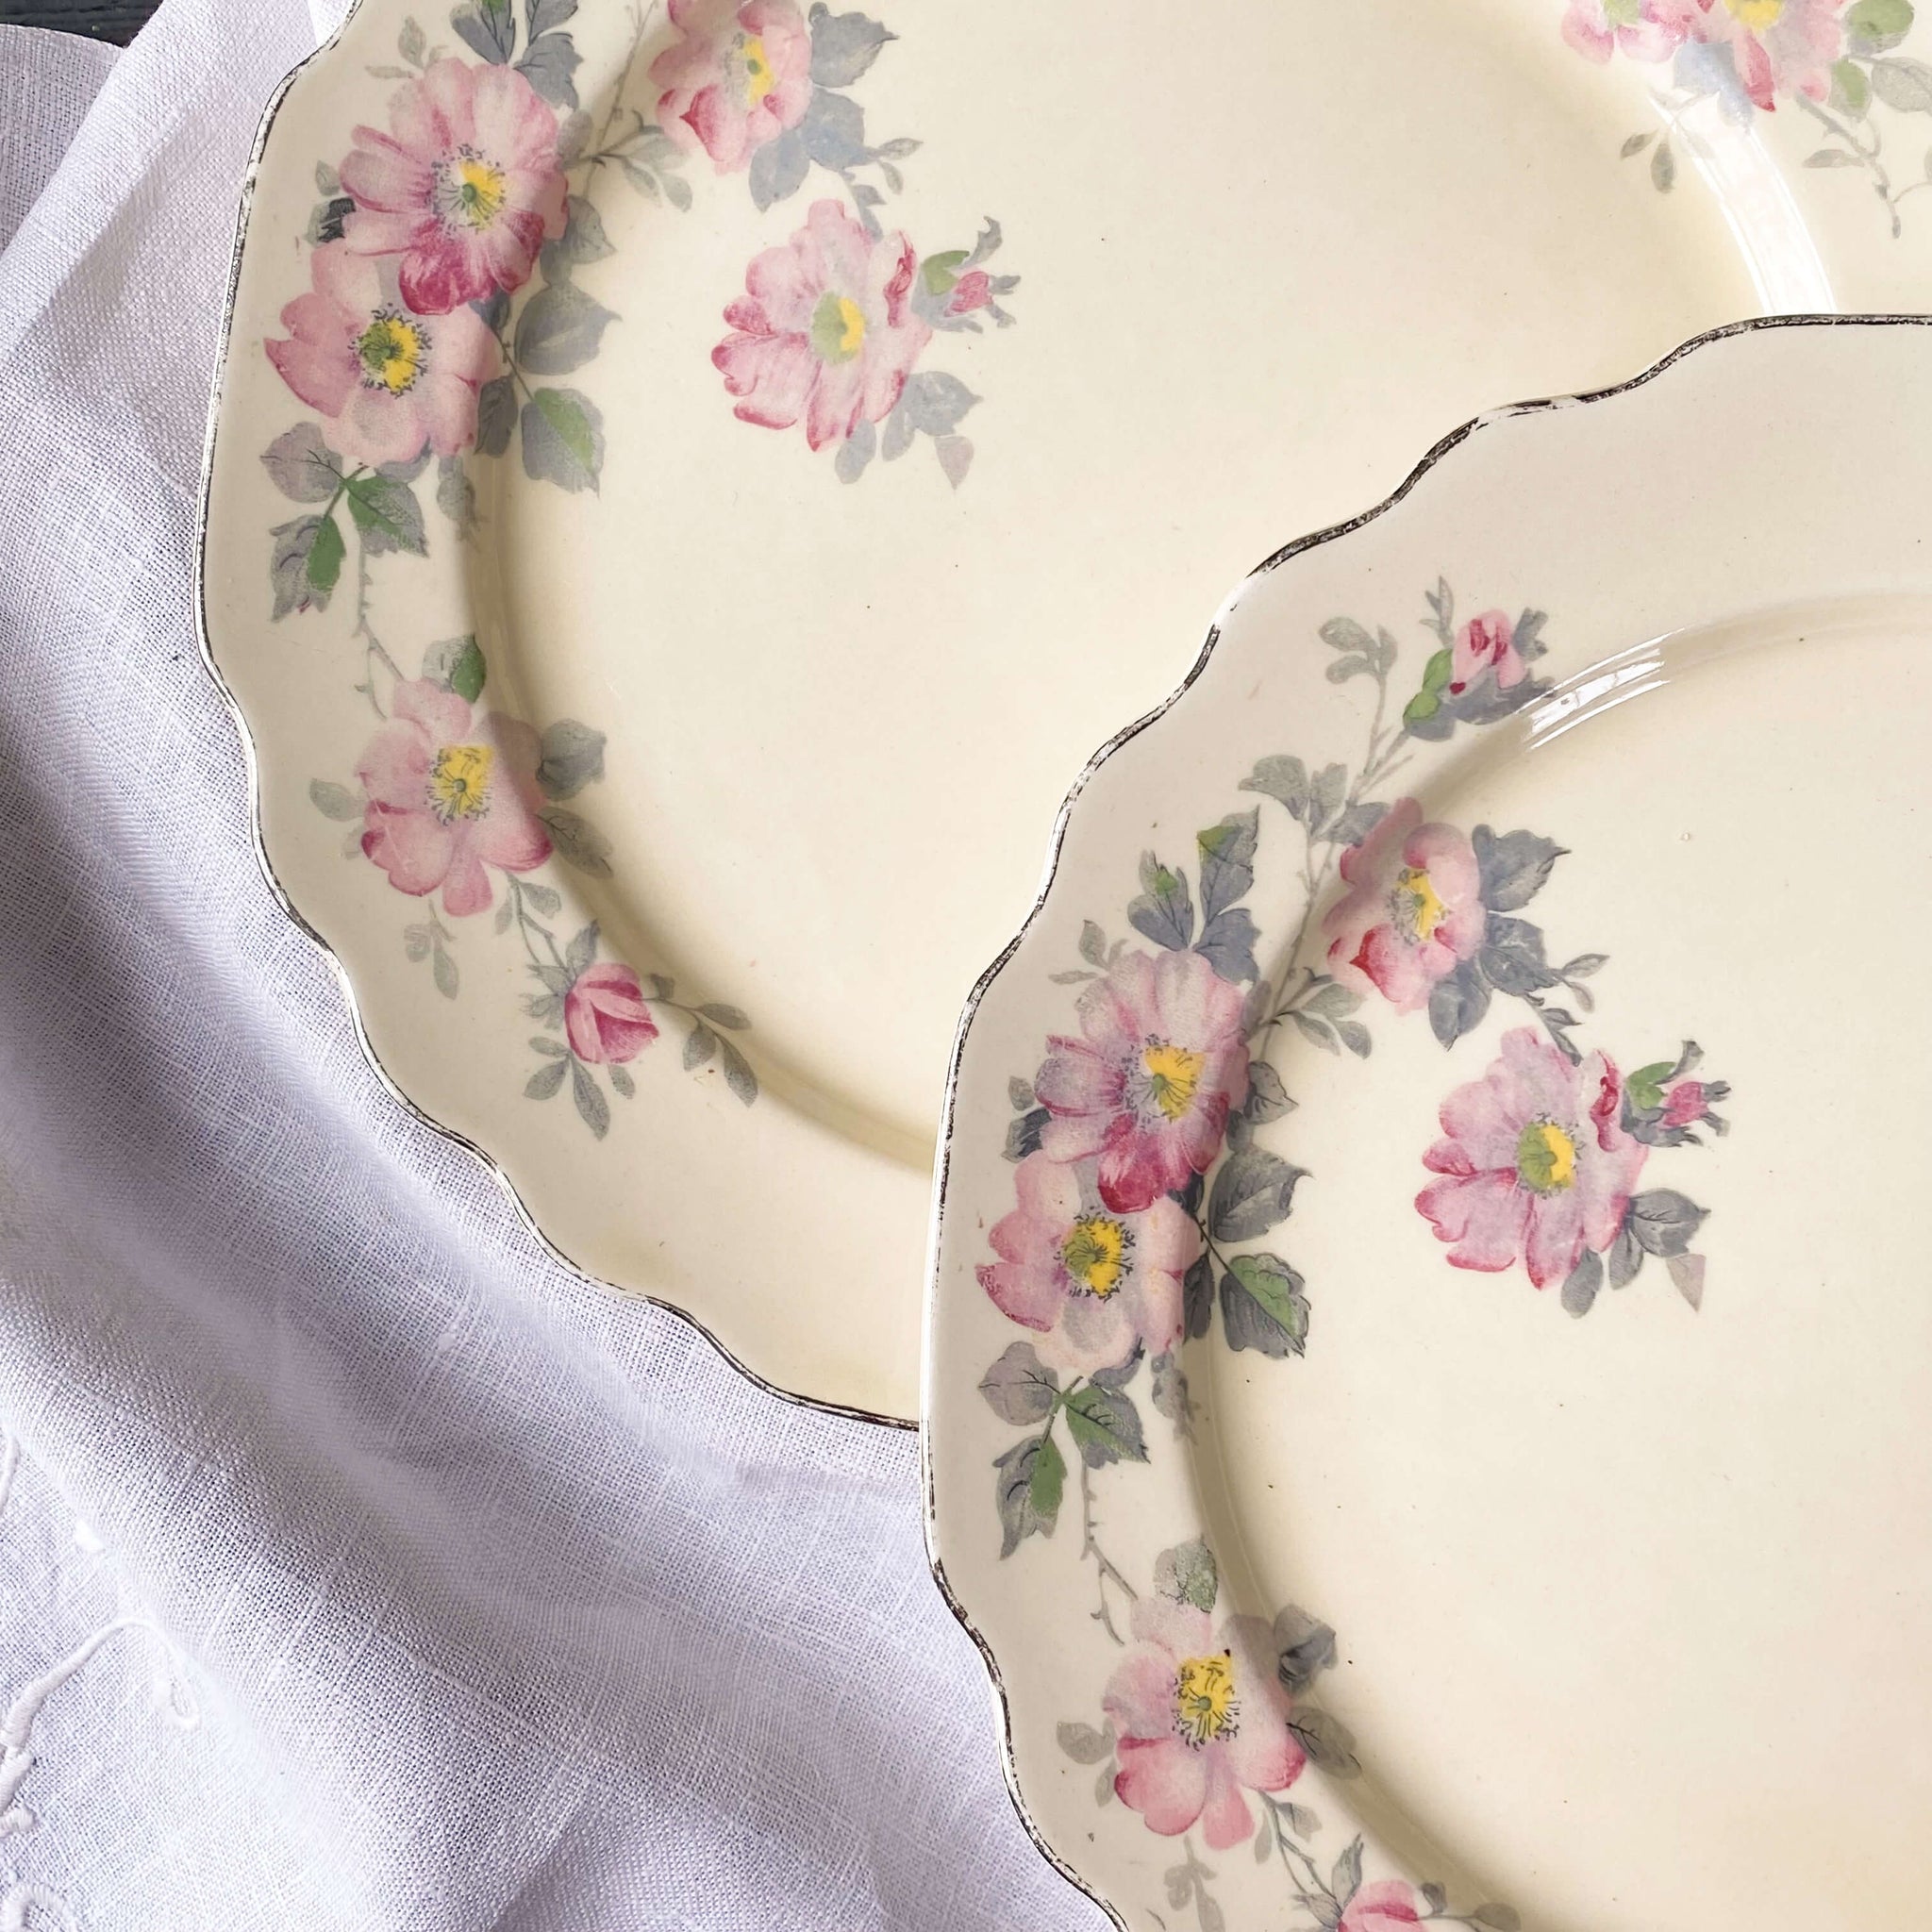 Vintage 1950s Pink Blossom Luncheon Plates by WS George Canarytone Color Lido Shape circa 1954 - Set of Two